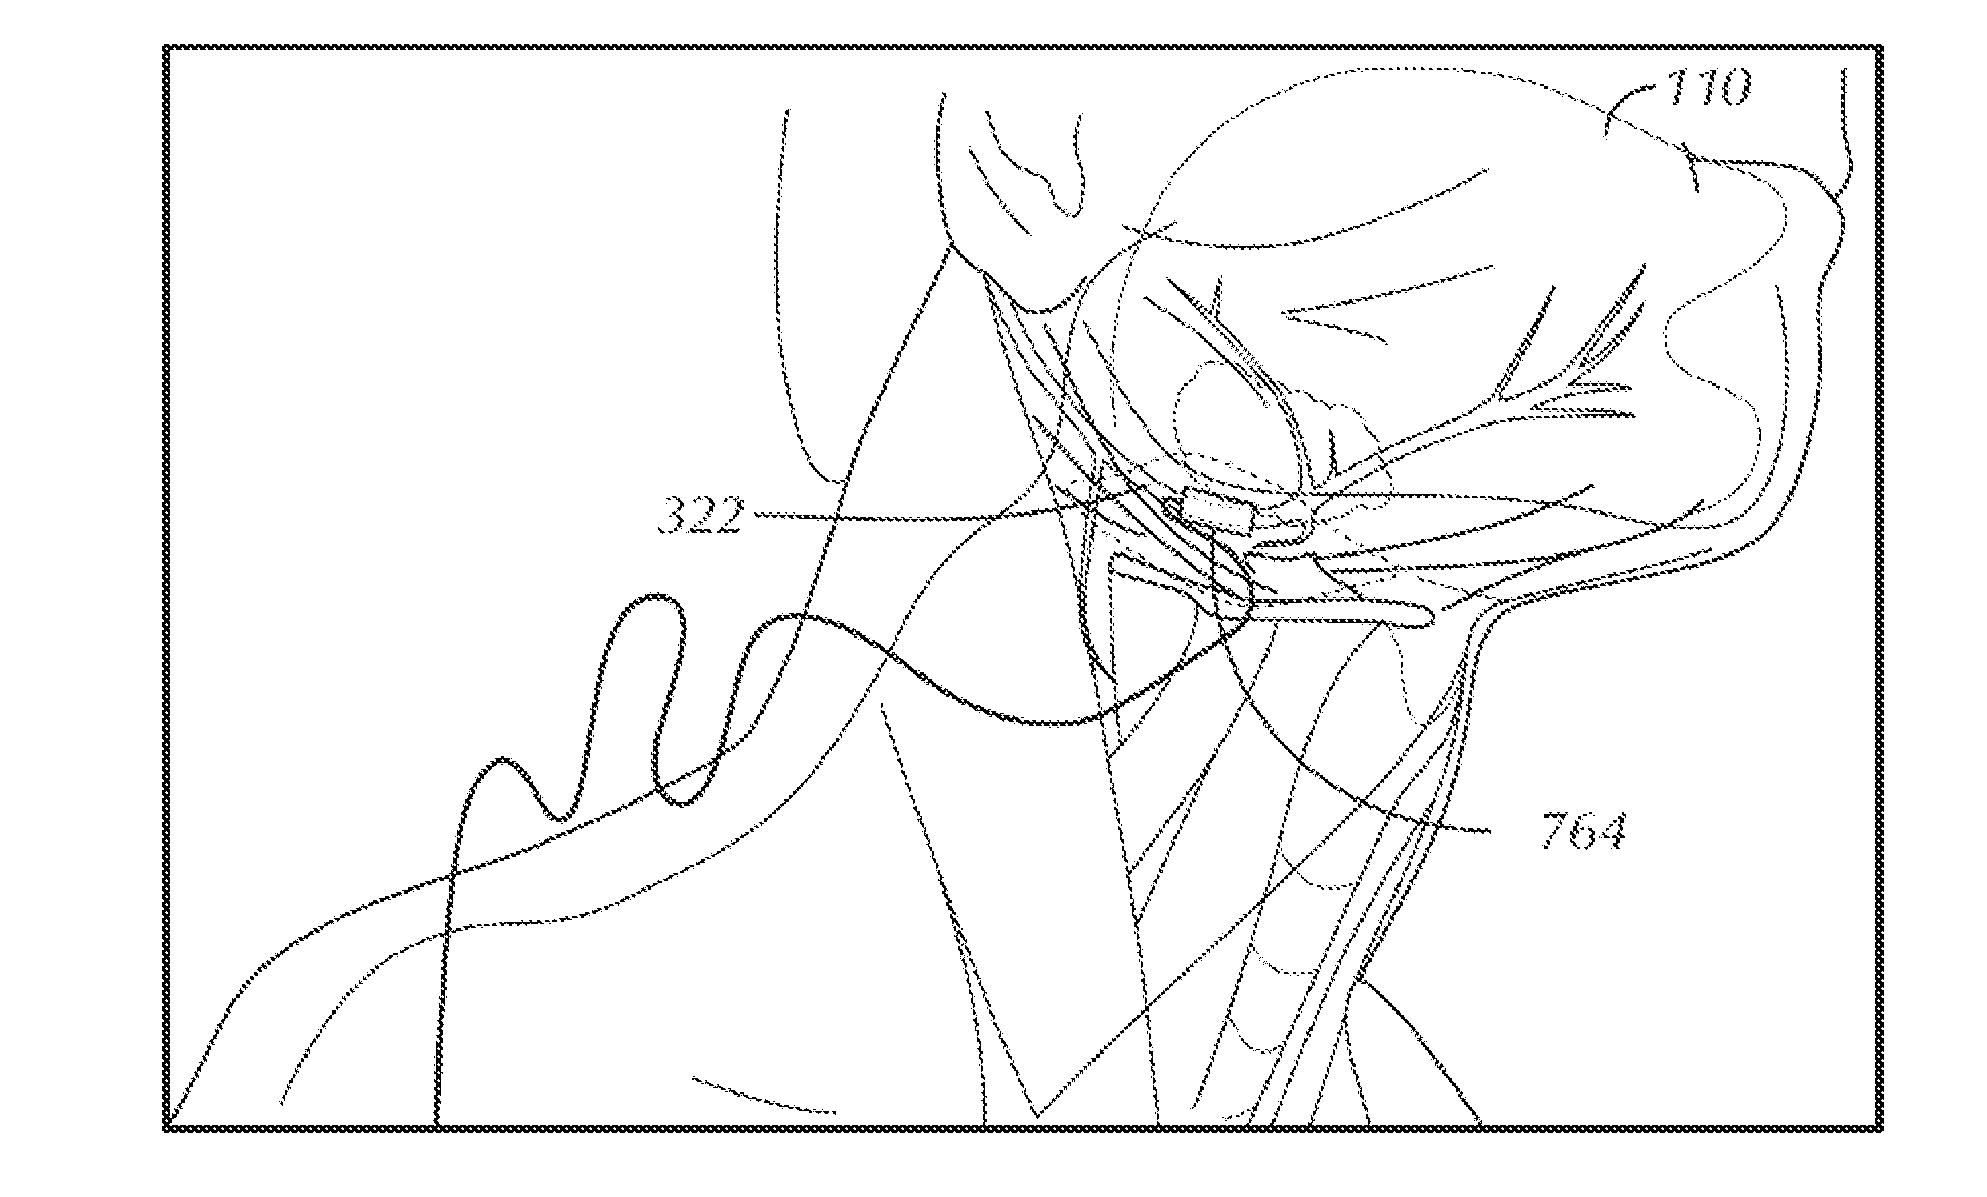 Stimulation of a Hypoglossal Nerve for Controlling the Position of a Patient's Tongue